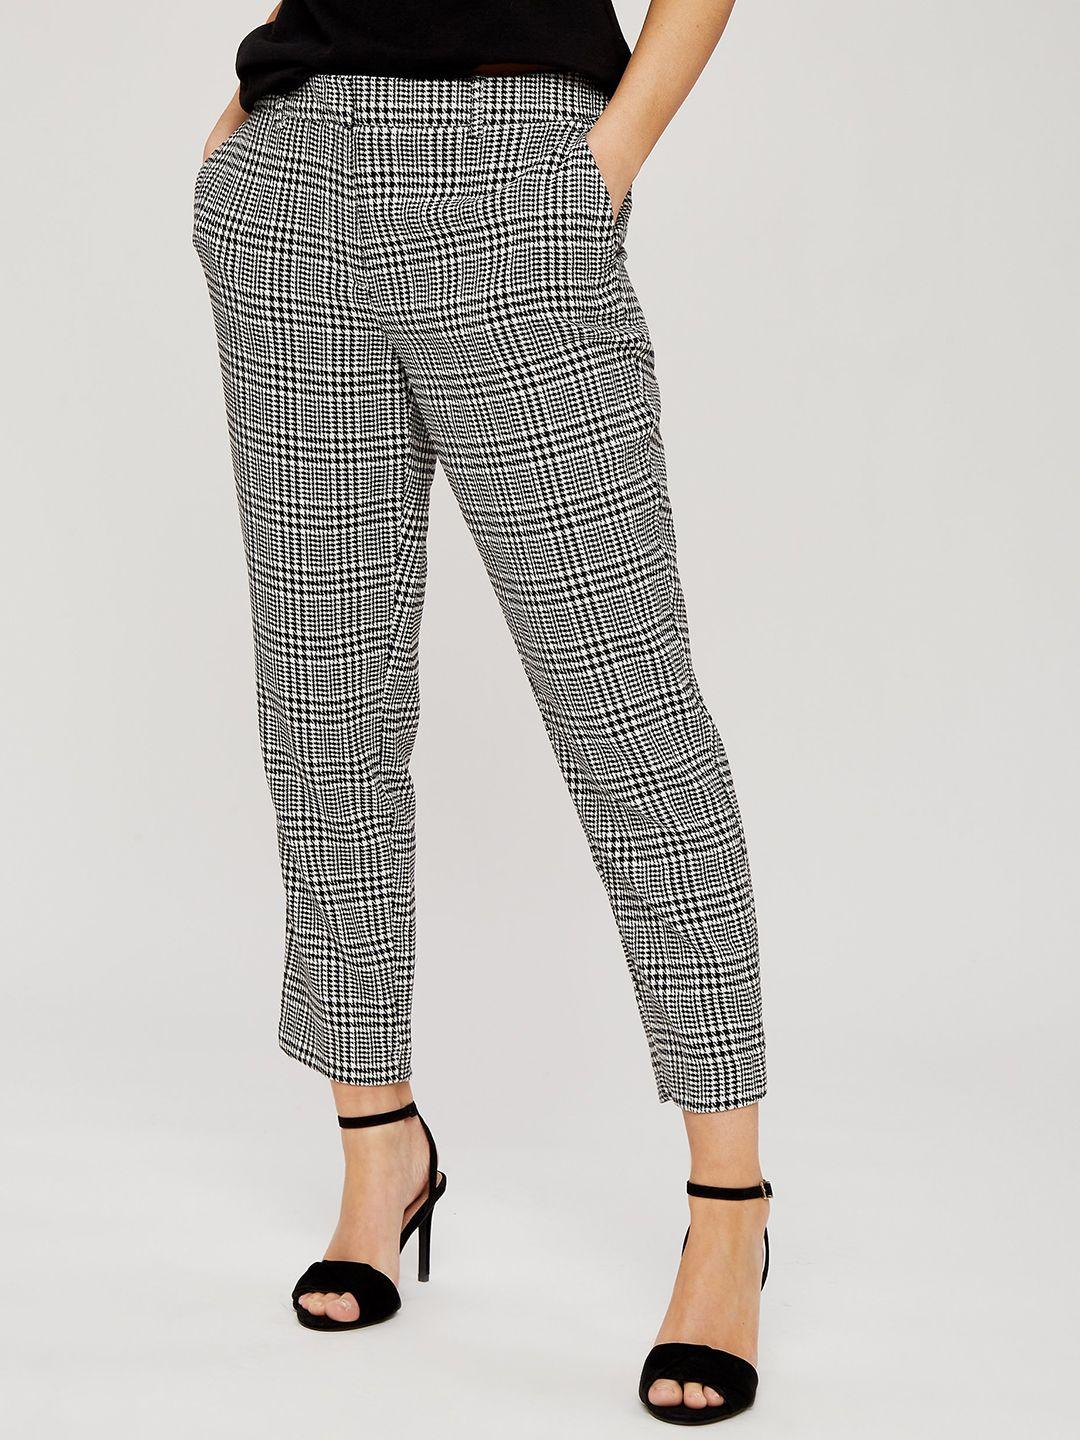 dorothy perkins petite women black & white regular fit houndstooth patterned trousers